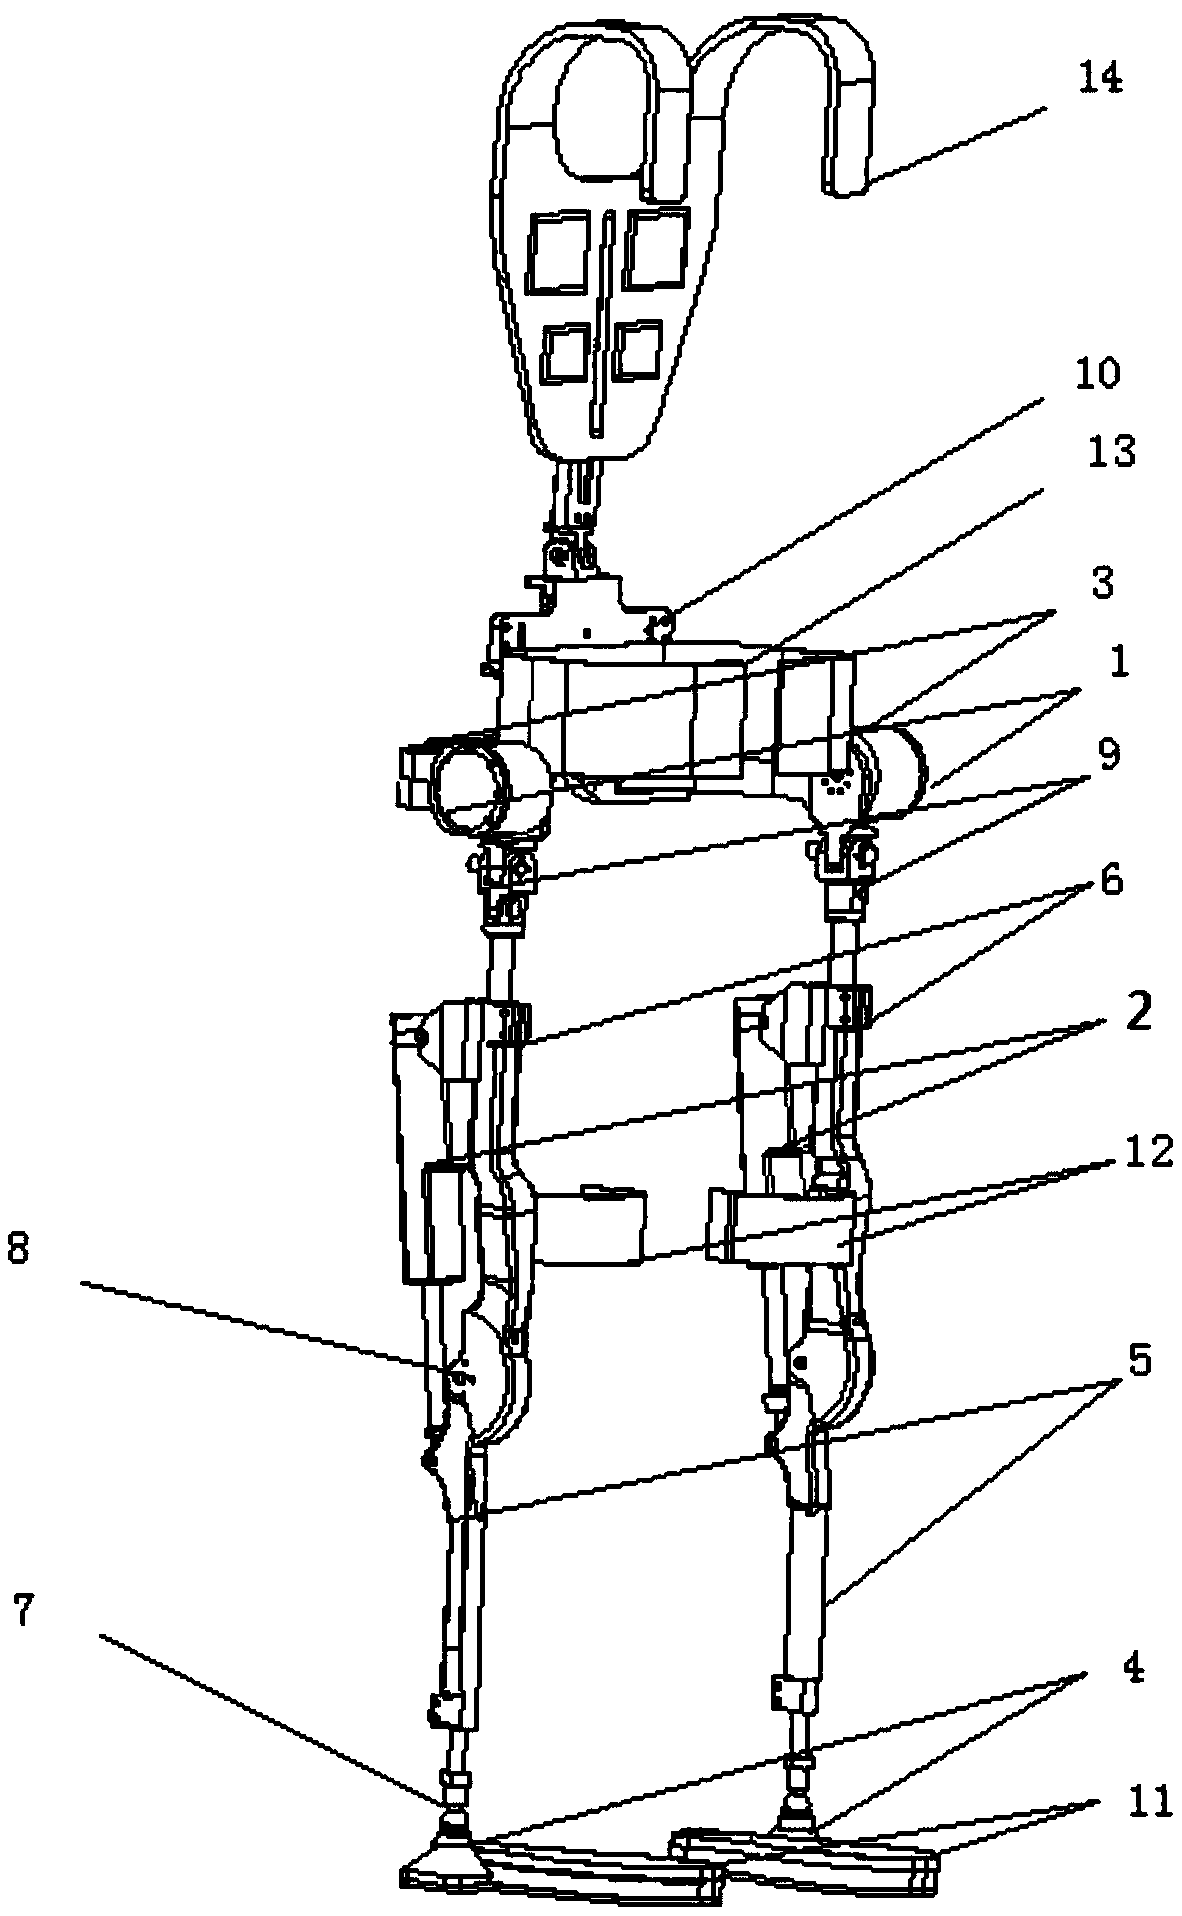 An assisted lightweight integrated multi-degree-of-freedom lower extremity exoskeleton